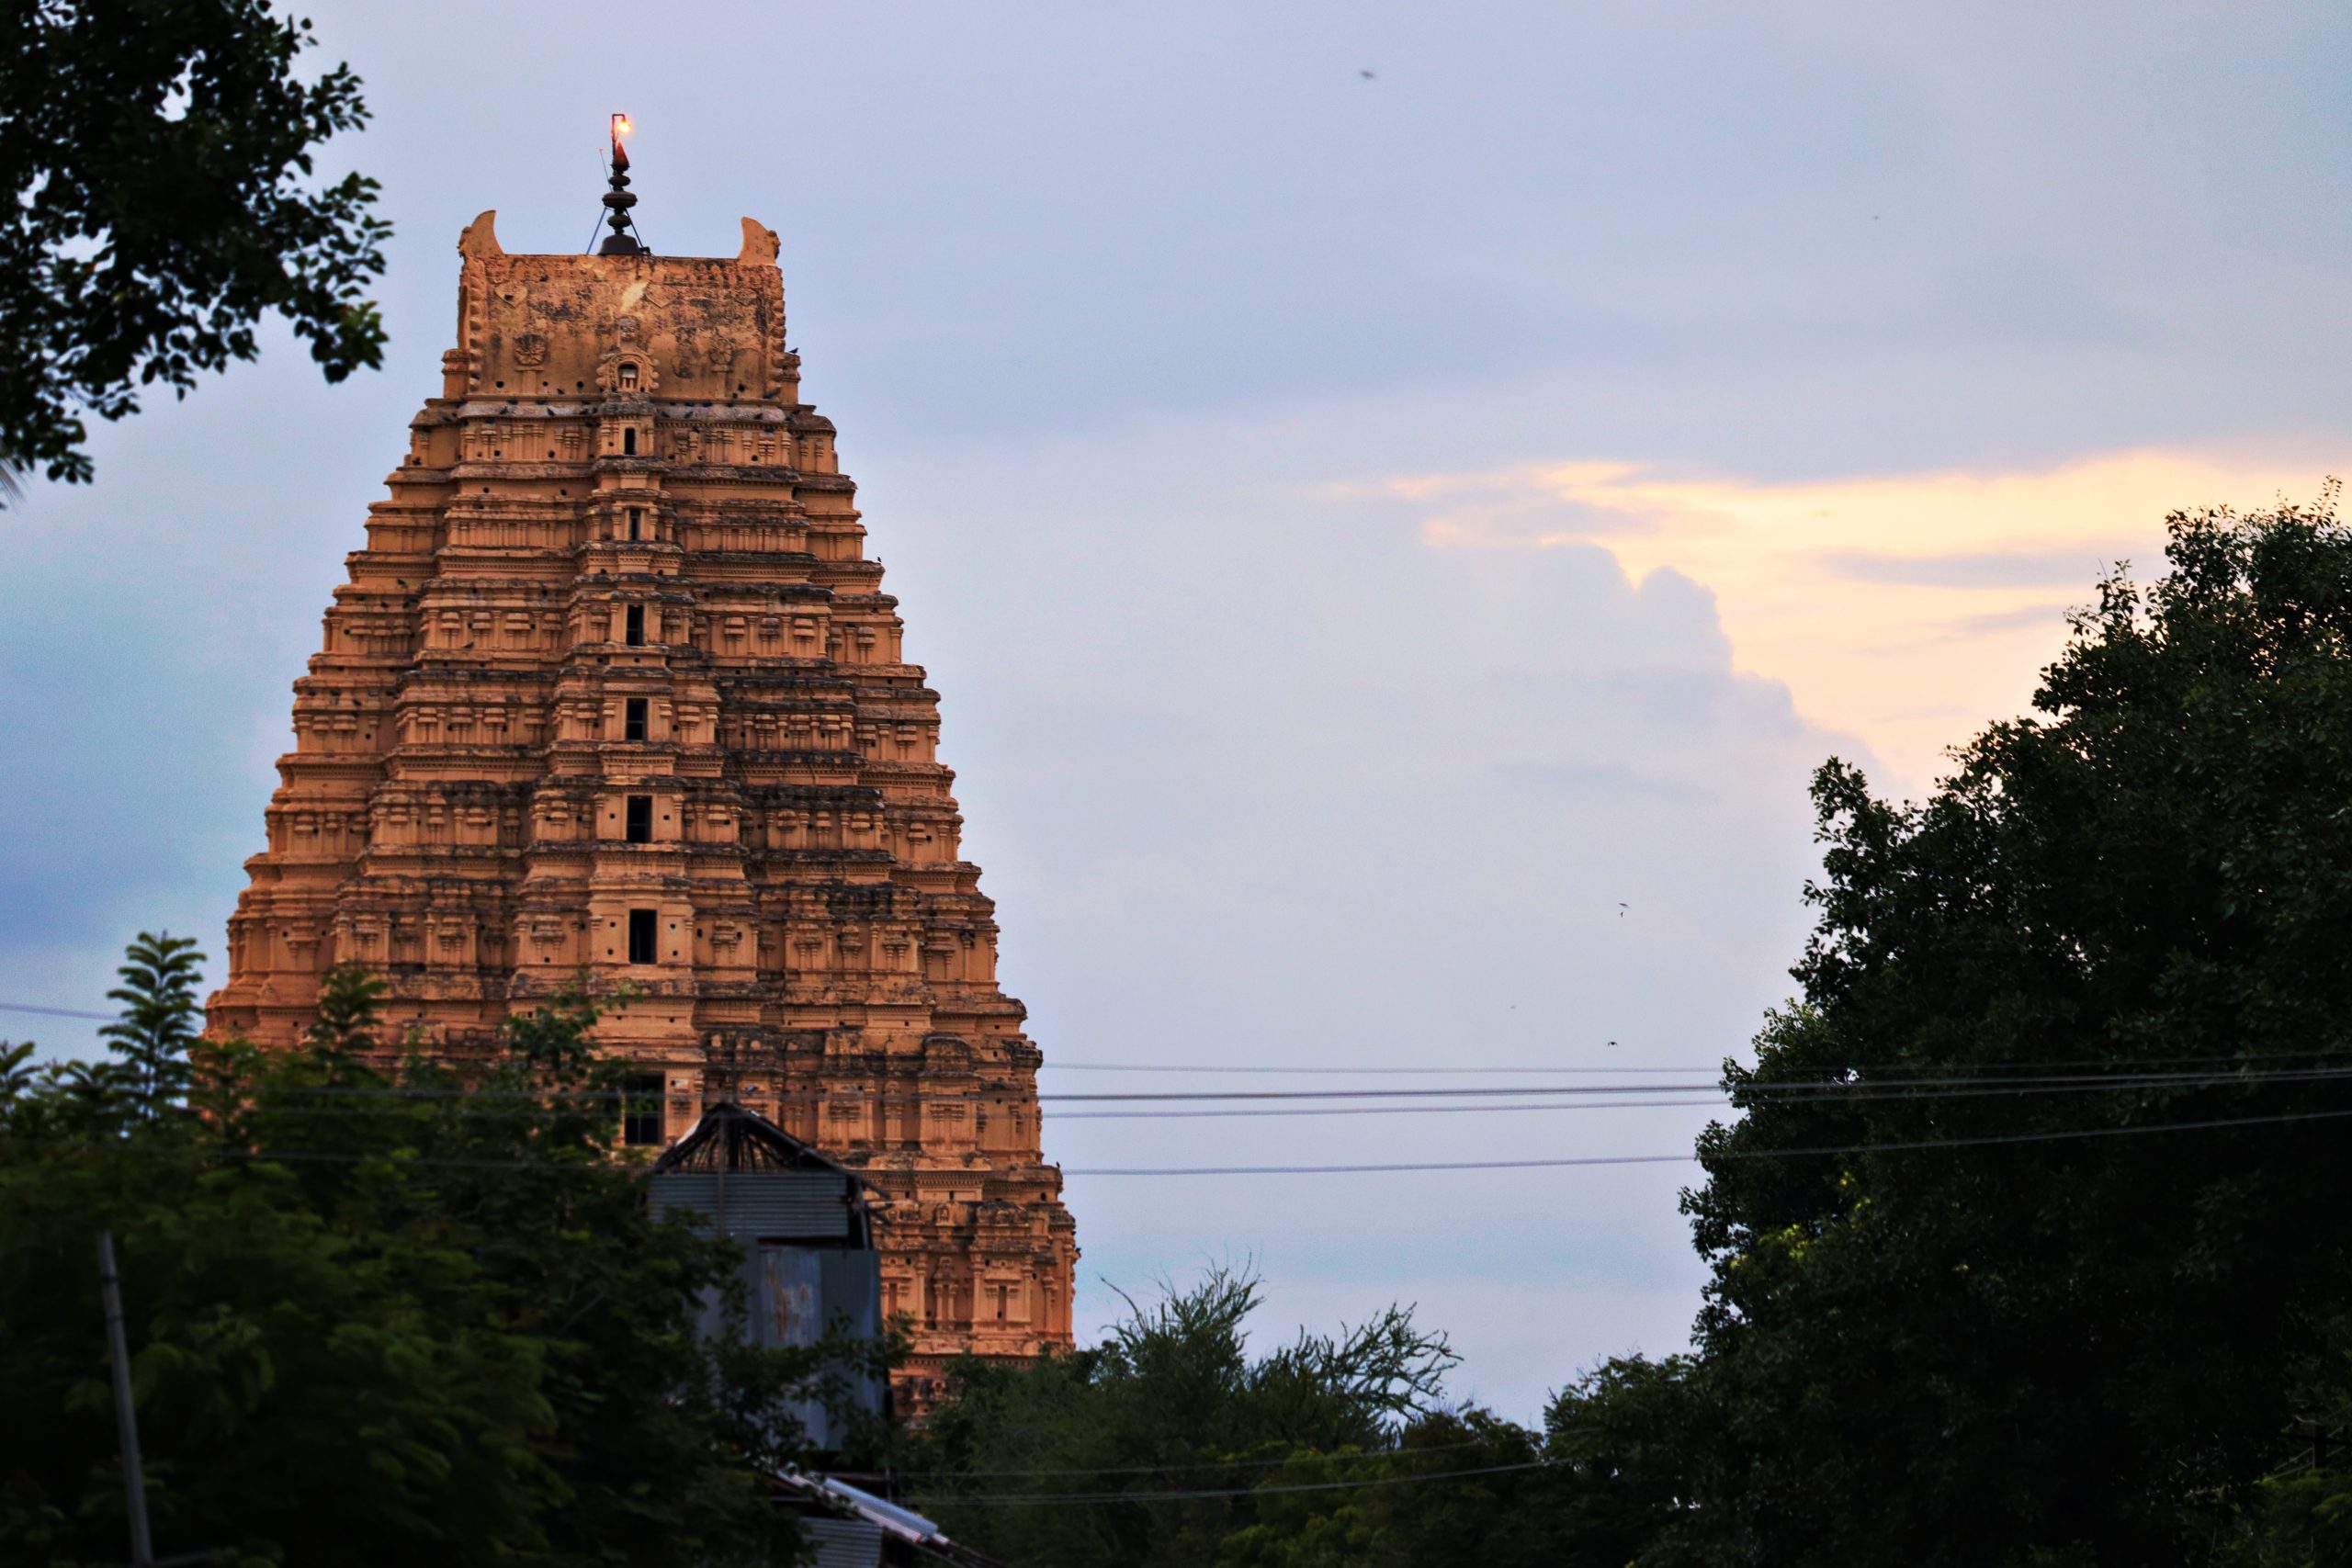 A Temple in South India